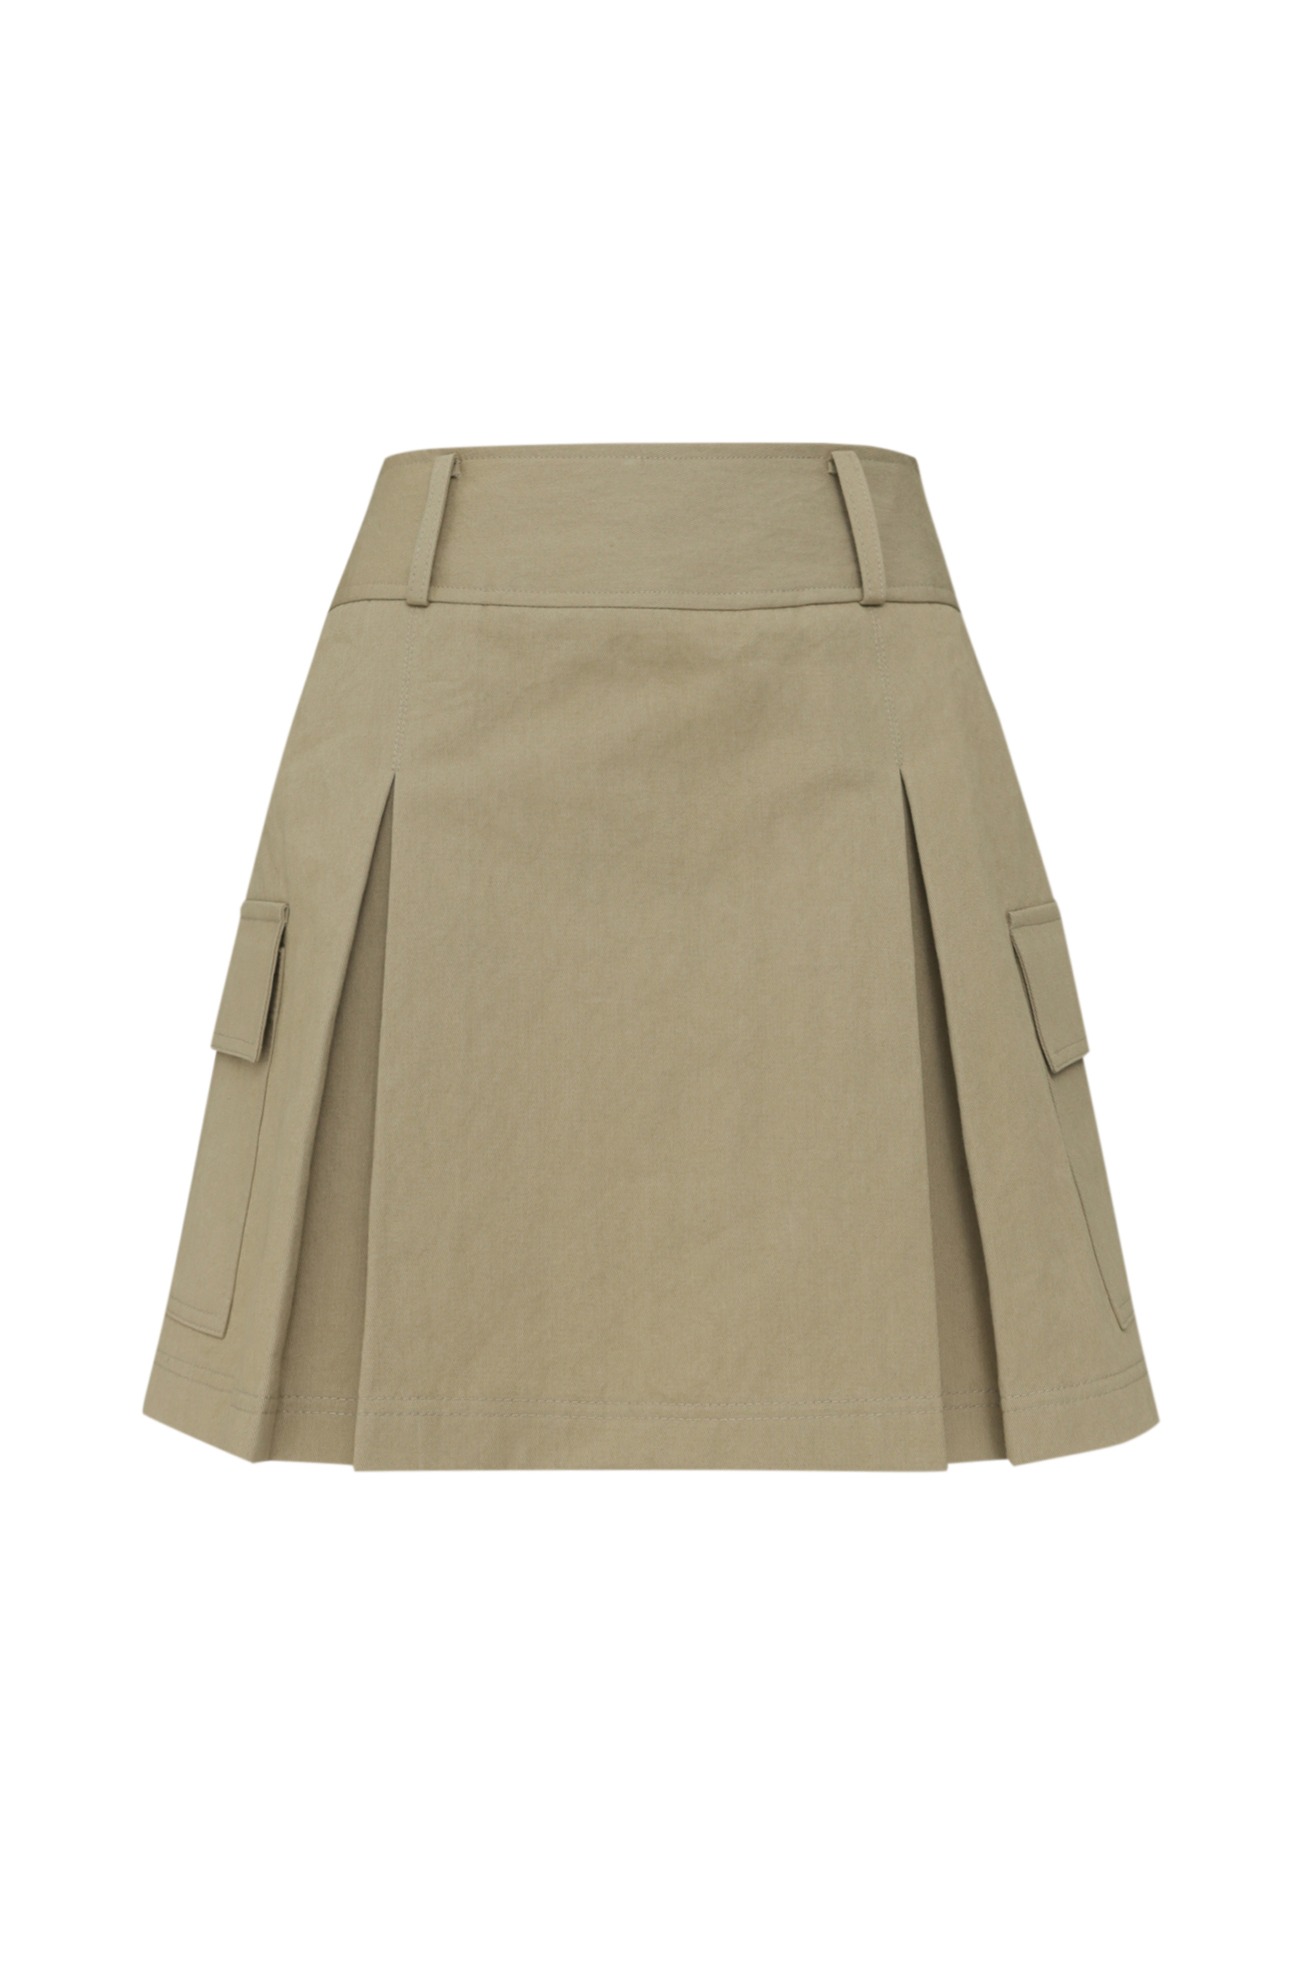 Patch Detail Mini Skirt   4/4 순차발송